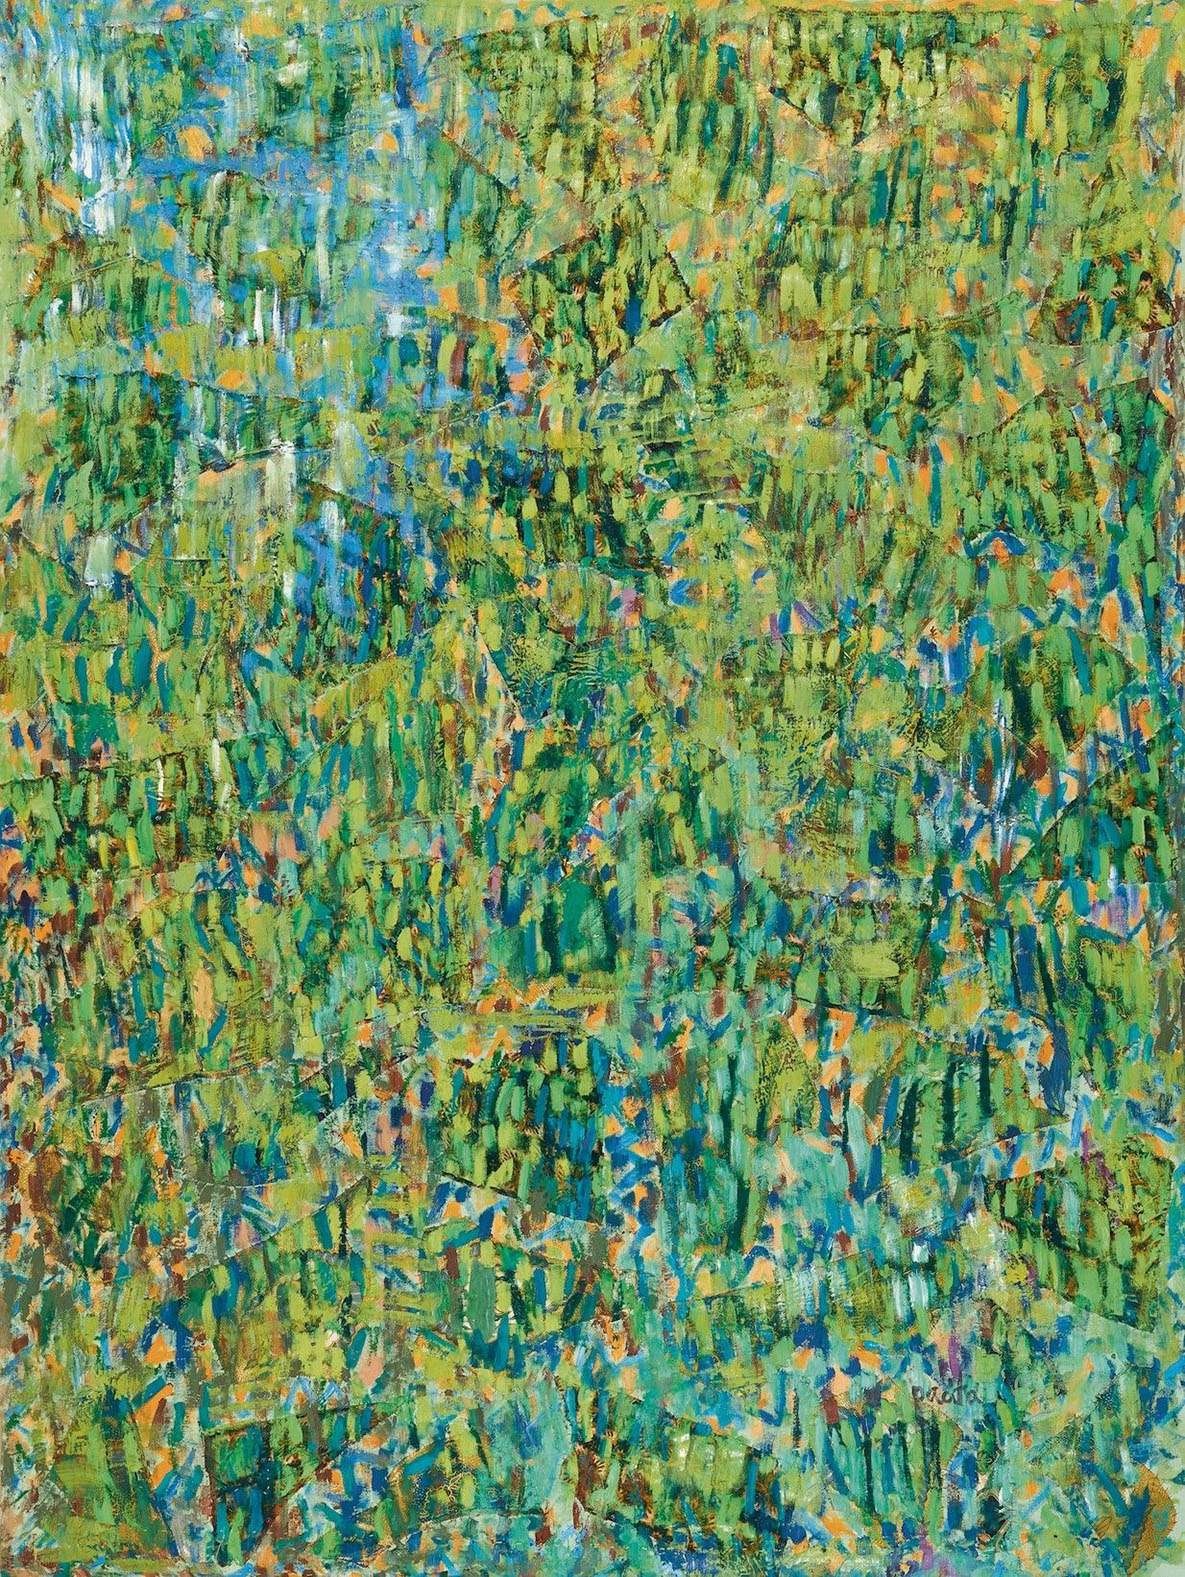 An abstract composition by Pacita Abad done in shades of green, blue, and orange hues, It features small markings similar to blades of grass.